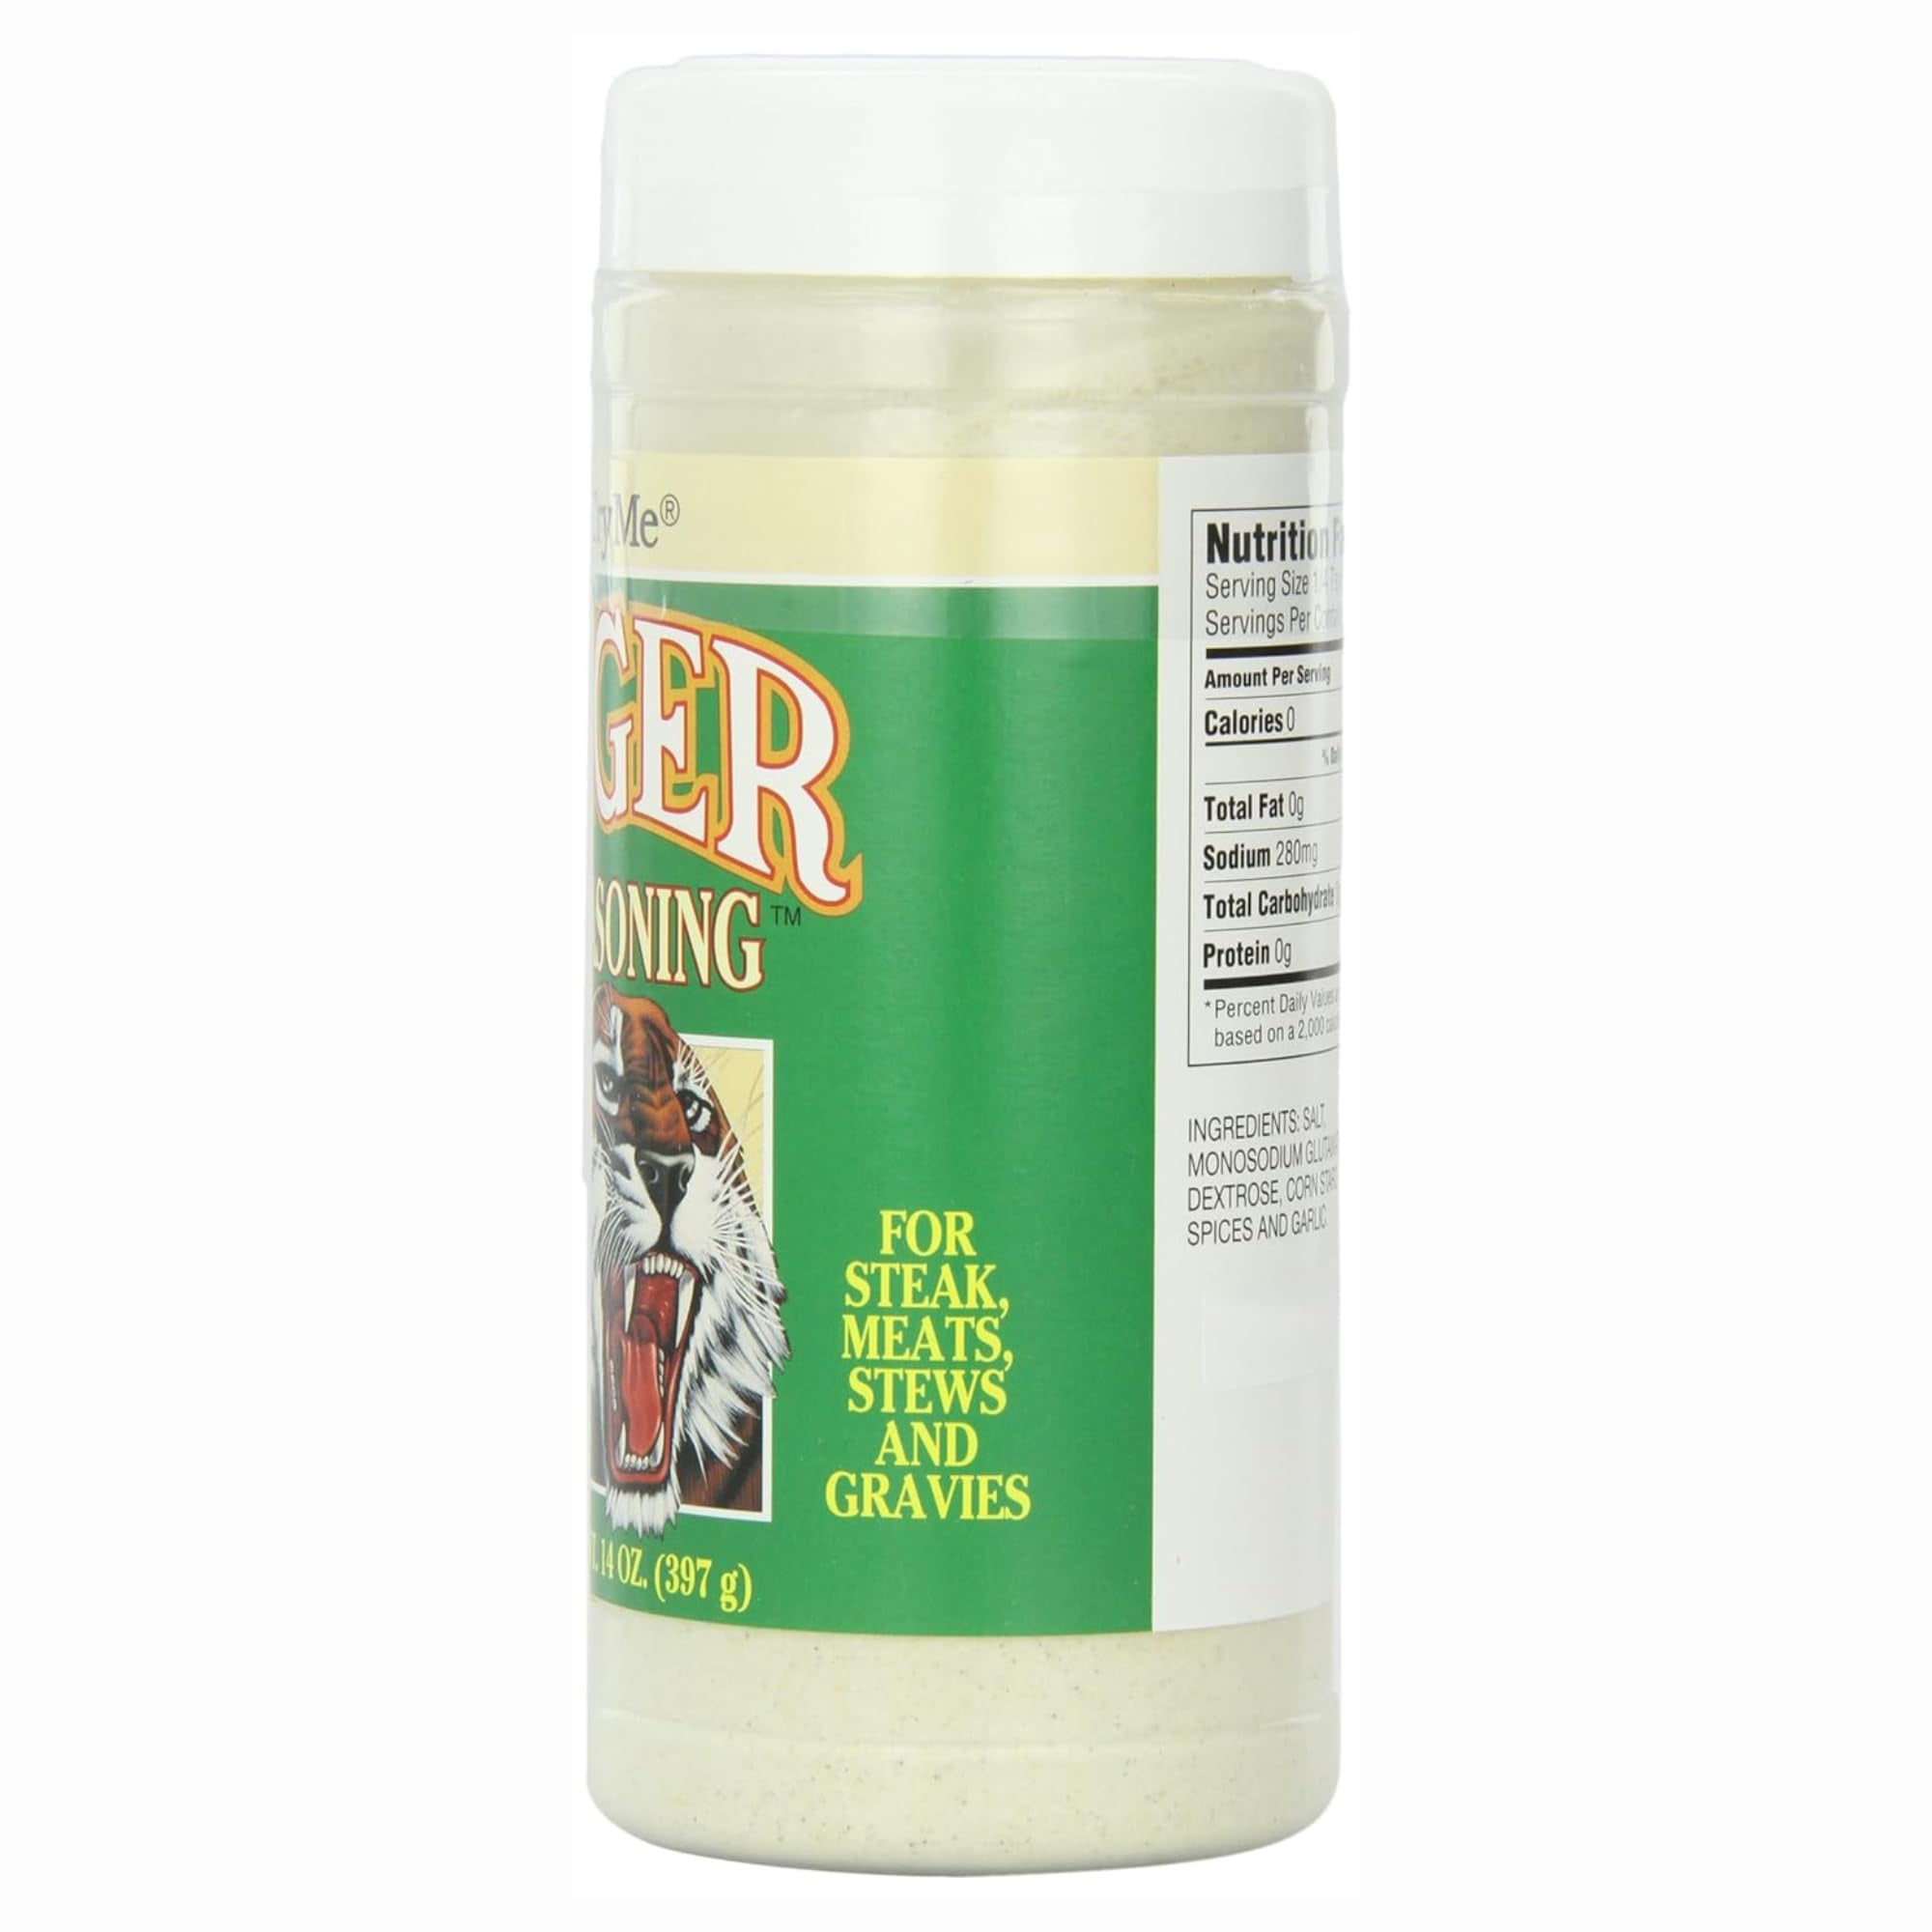 Cookson's Hardware - Tiger Seasoning is back in stock!